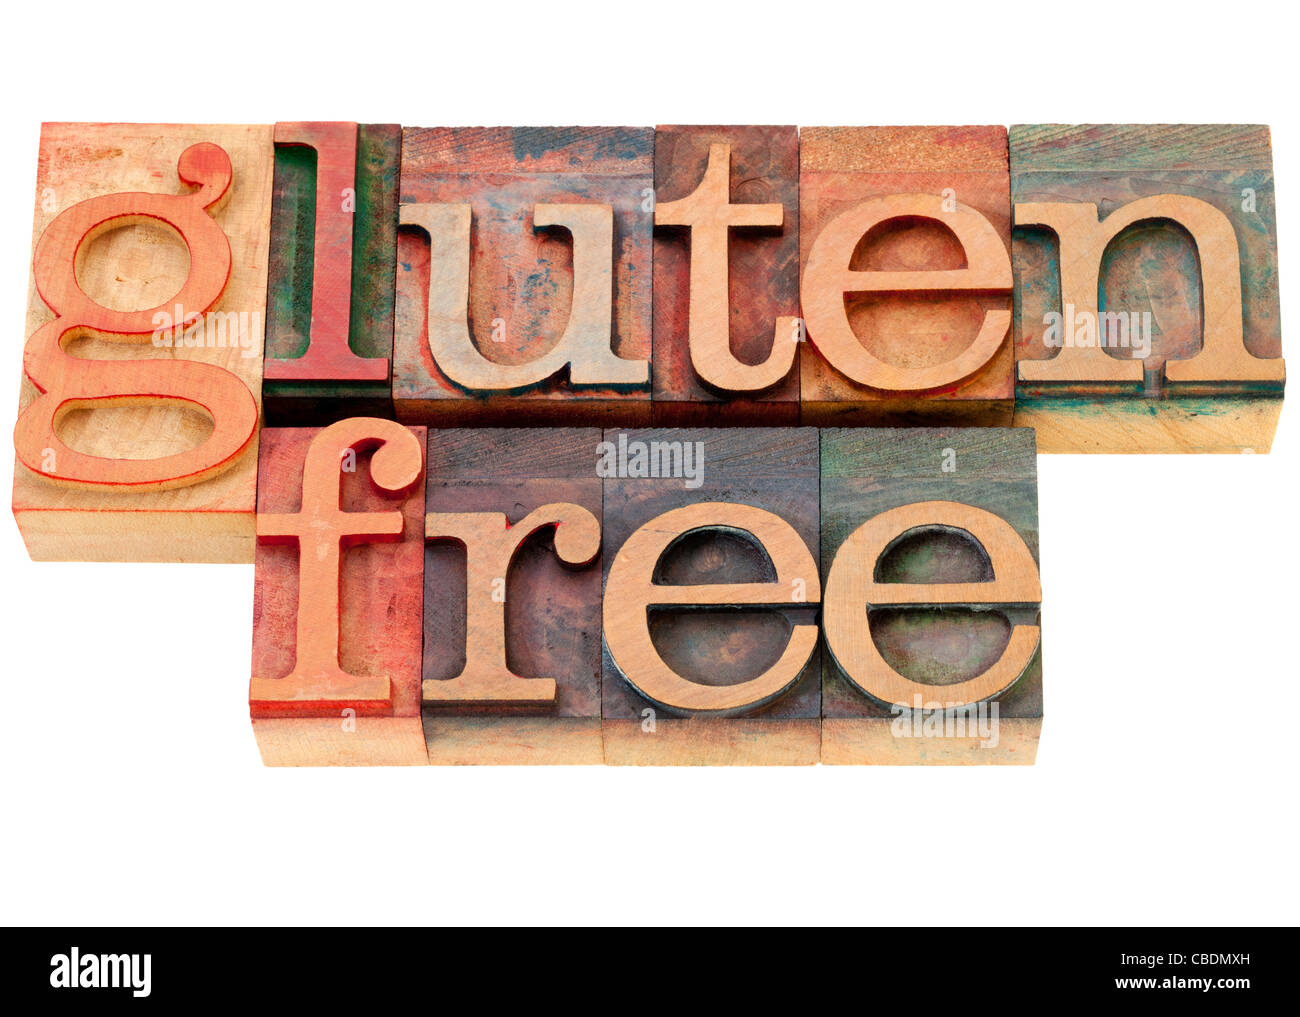 gluten free diet concept - isolated words in vintage wood letterpress printing blocks Stock Photo